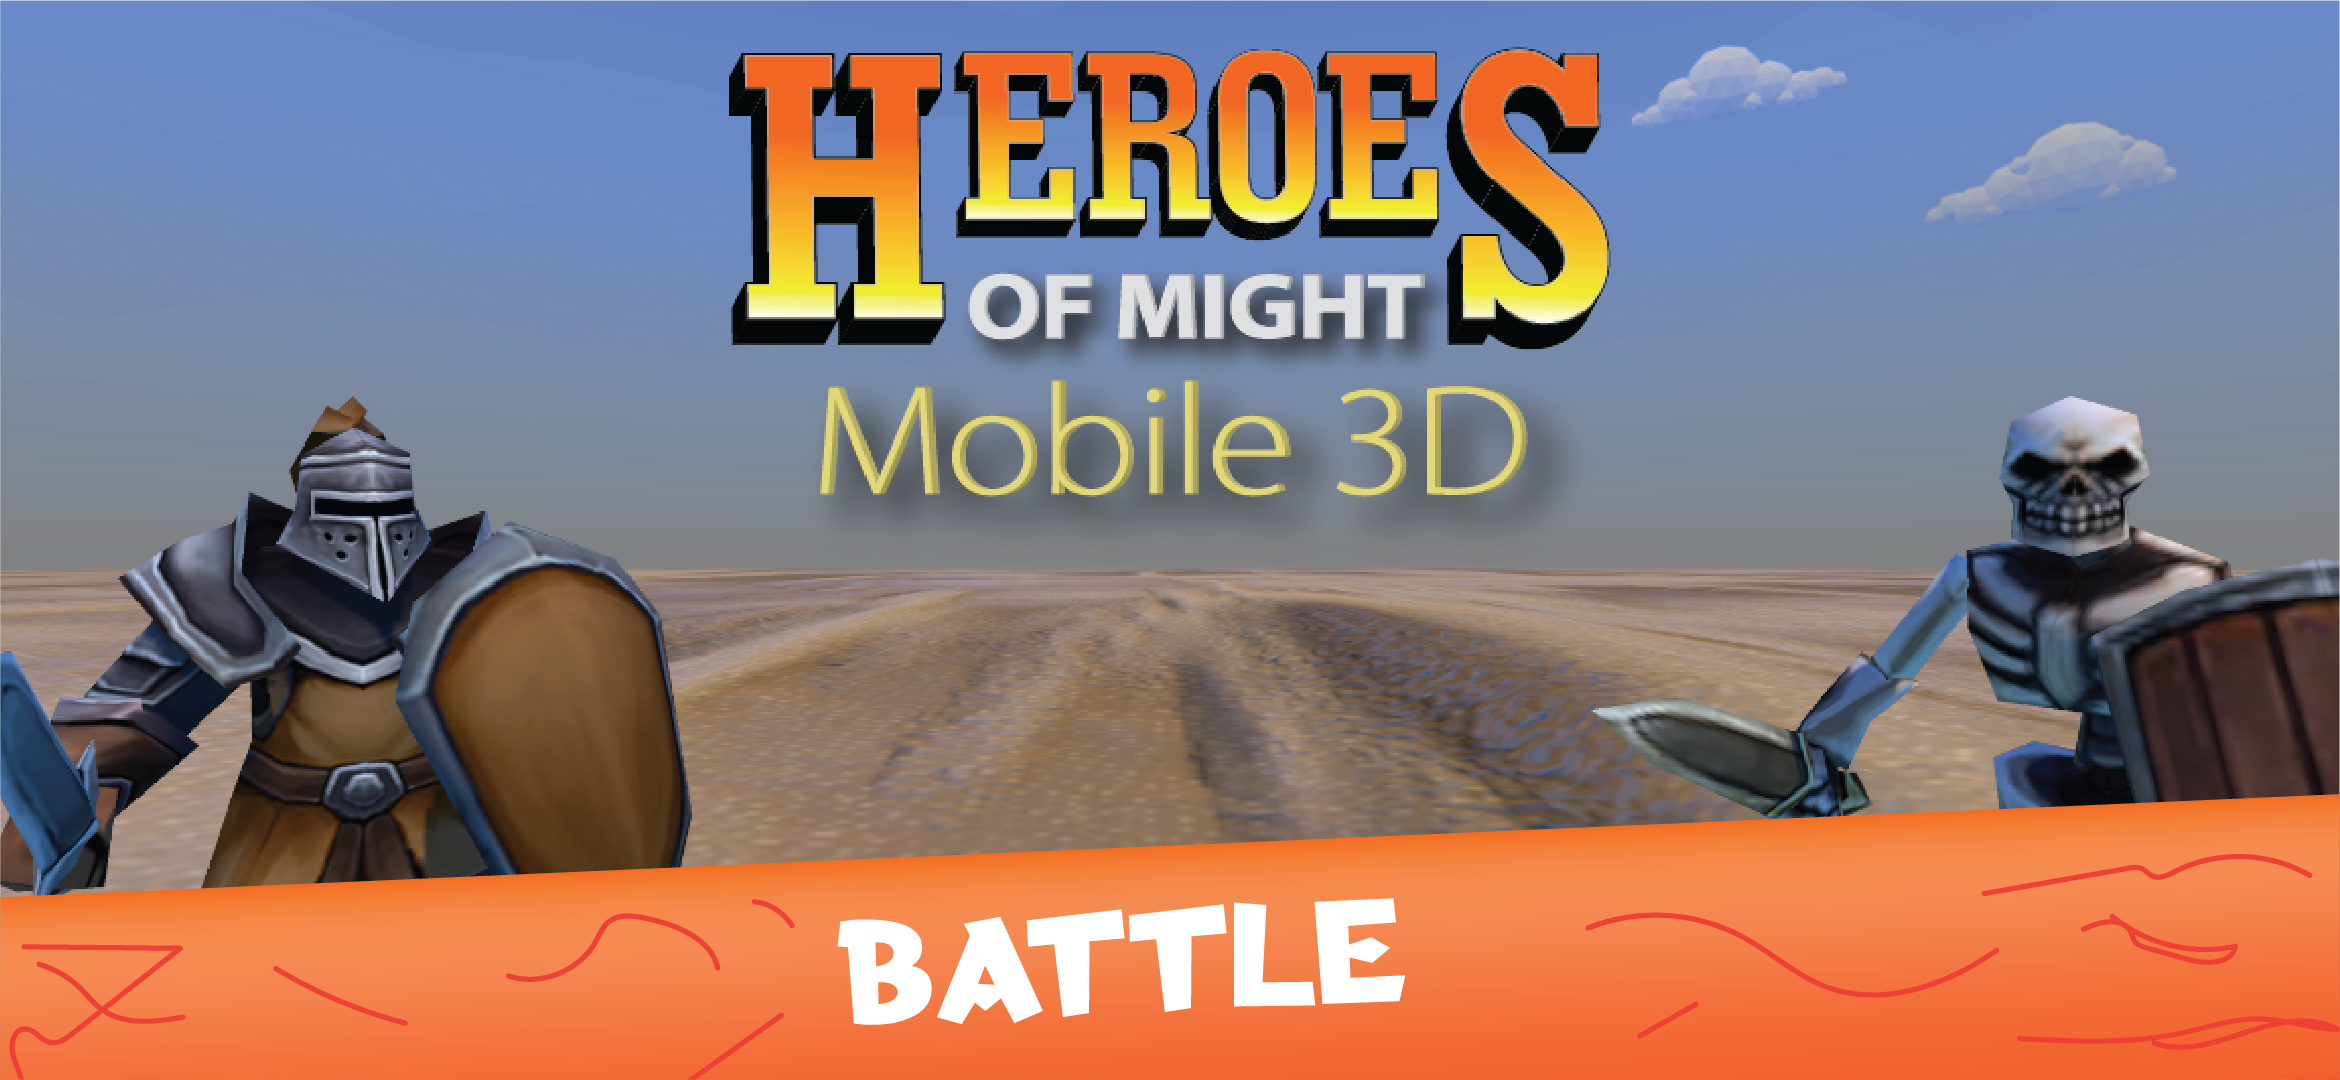 Heroes of Might Mobile 3D screenshot game